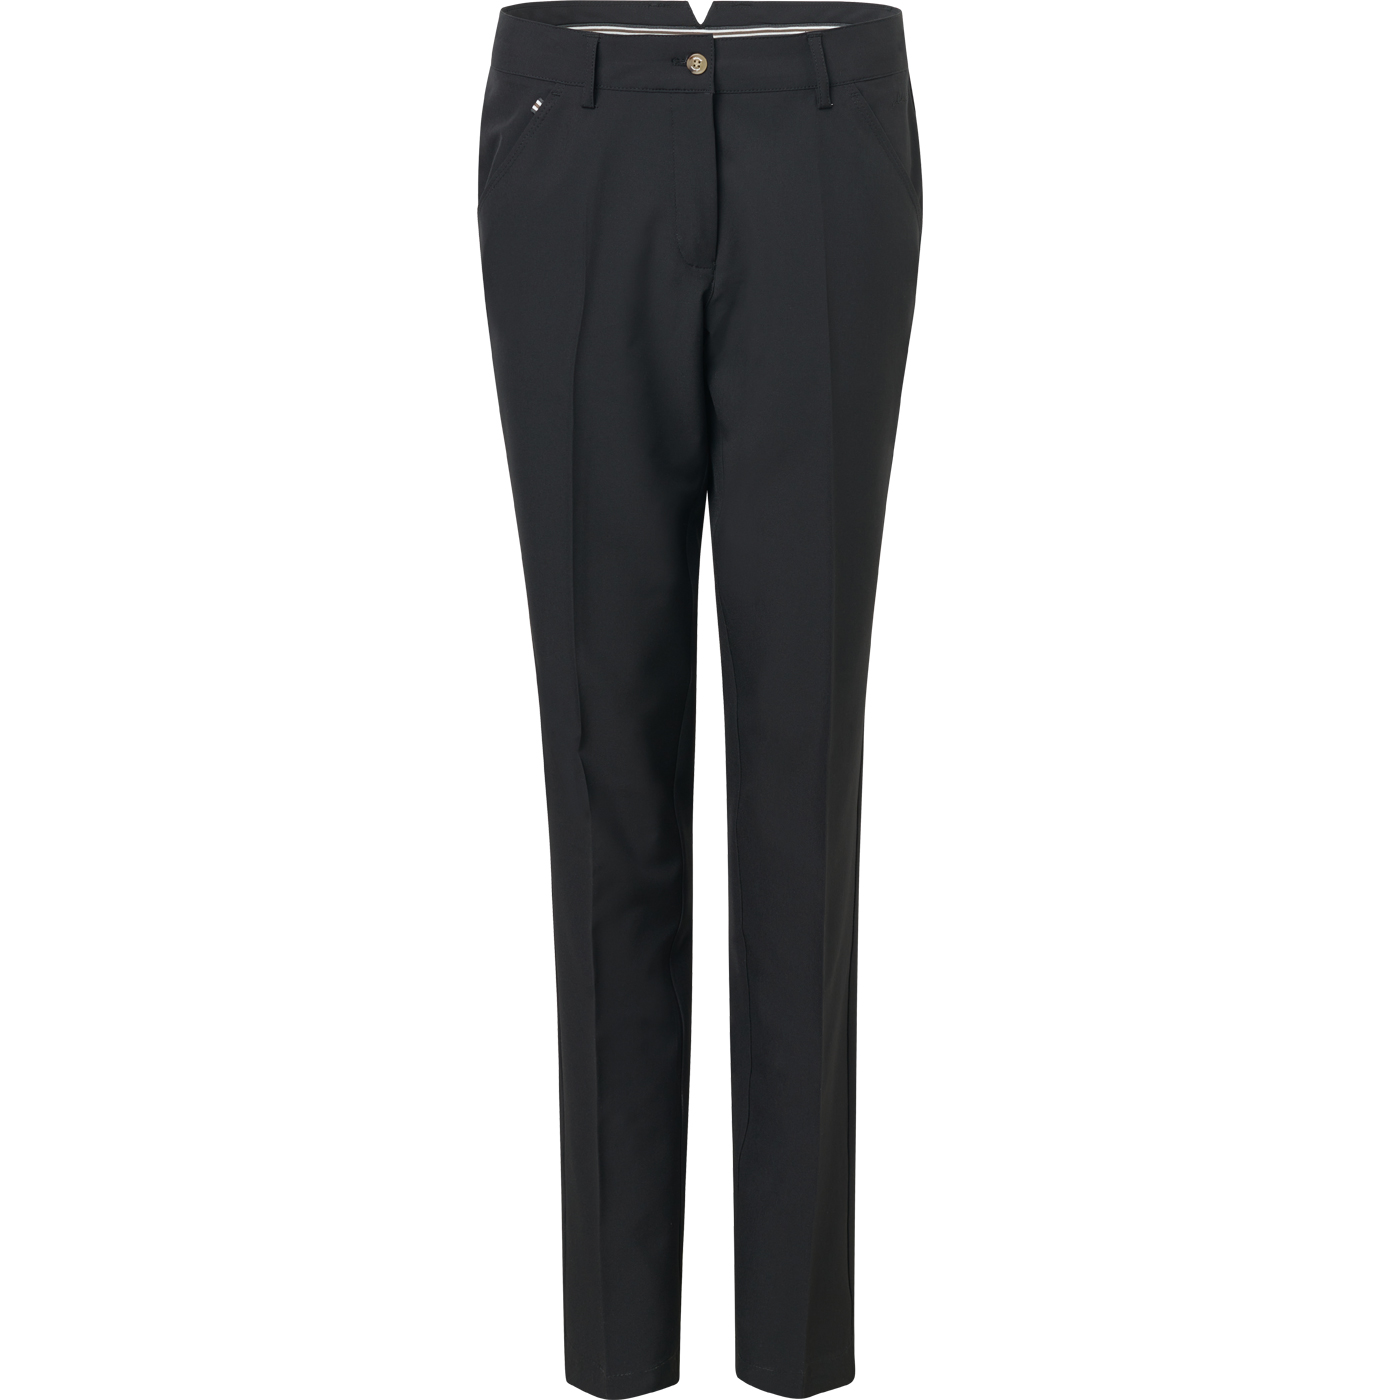 Lds Kildare trousers - black in the group WOMEN / All clothing at Abacus Sportswear (2980600)